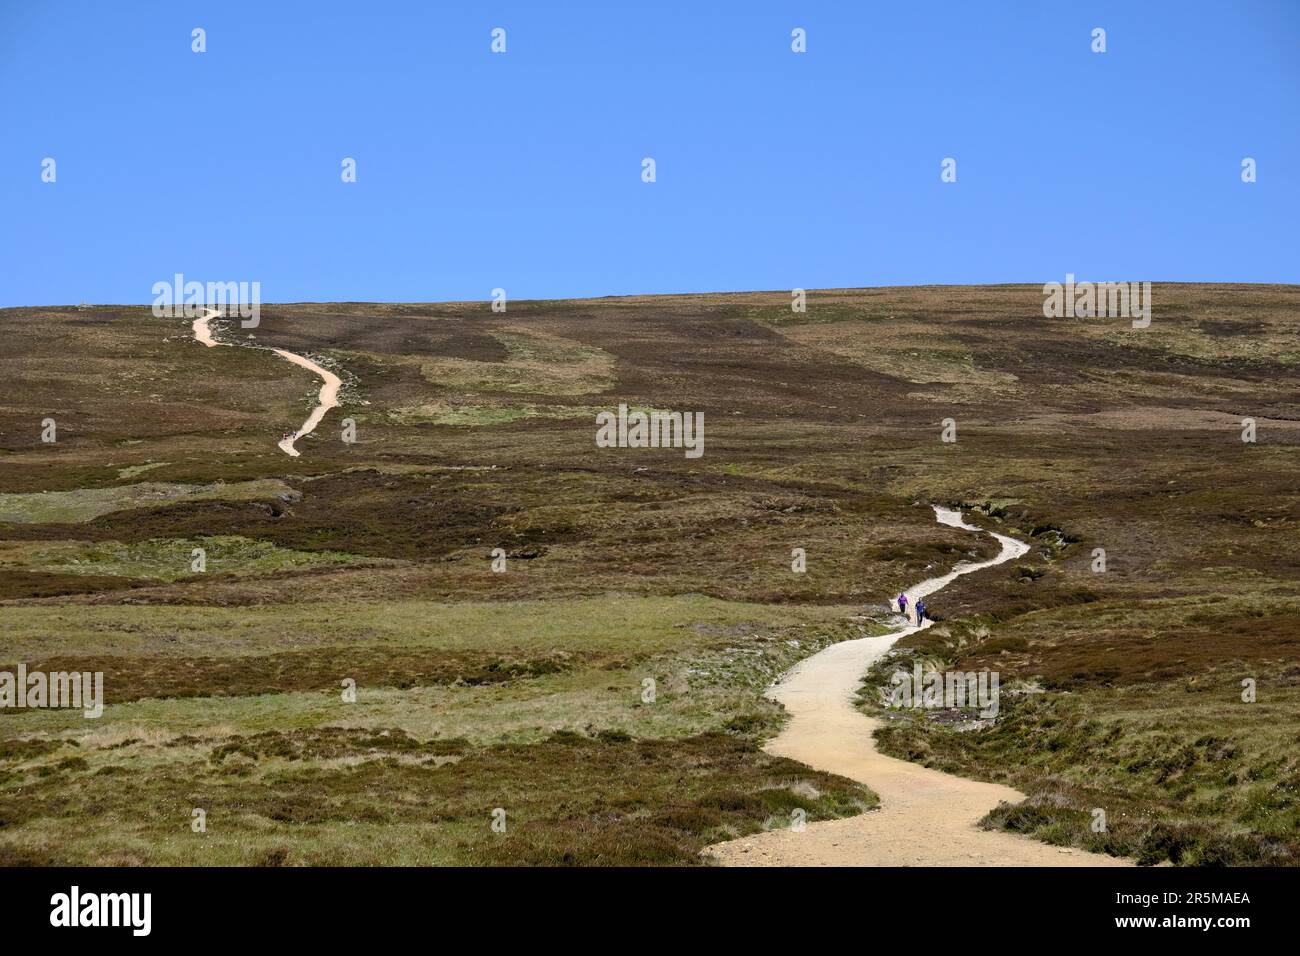 Hikers on the winding path up to munro Mount Keen, Angus Glens, Scotland Stock Photo